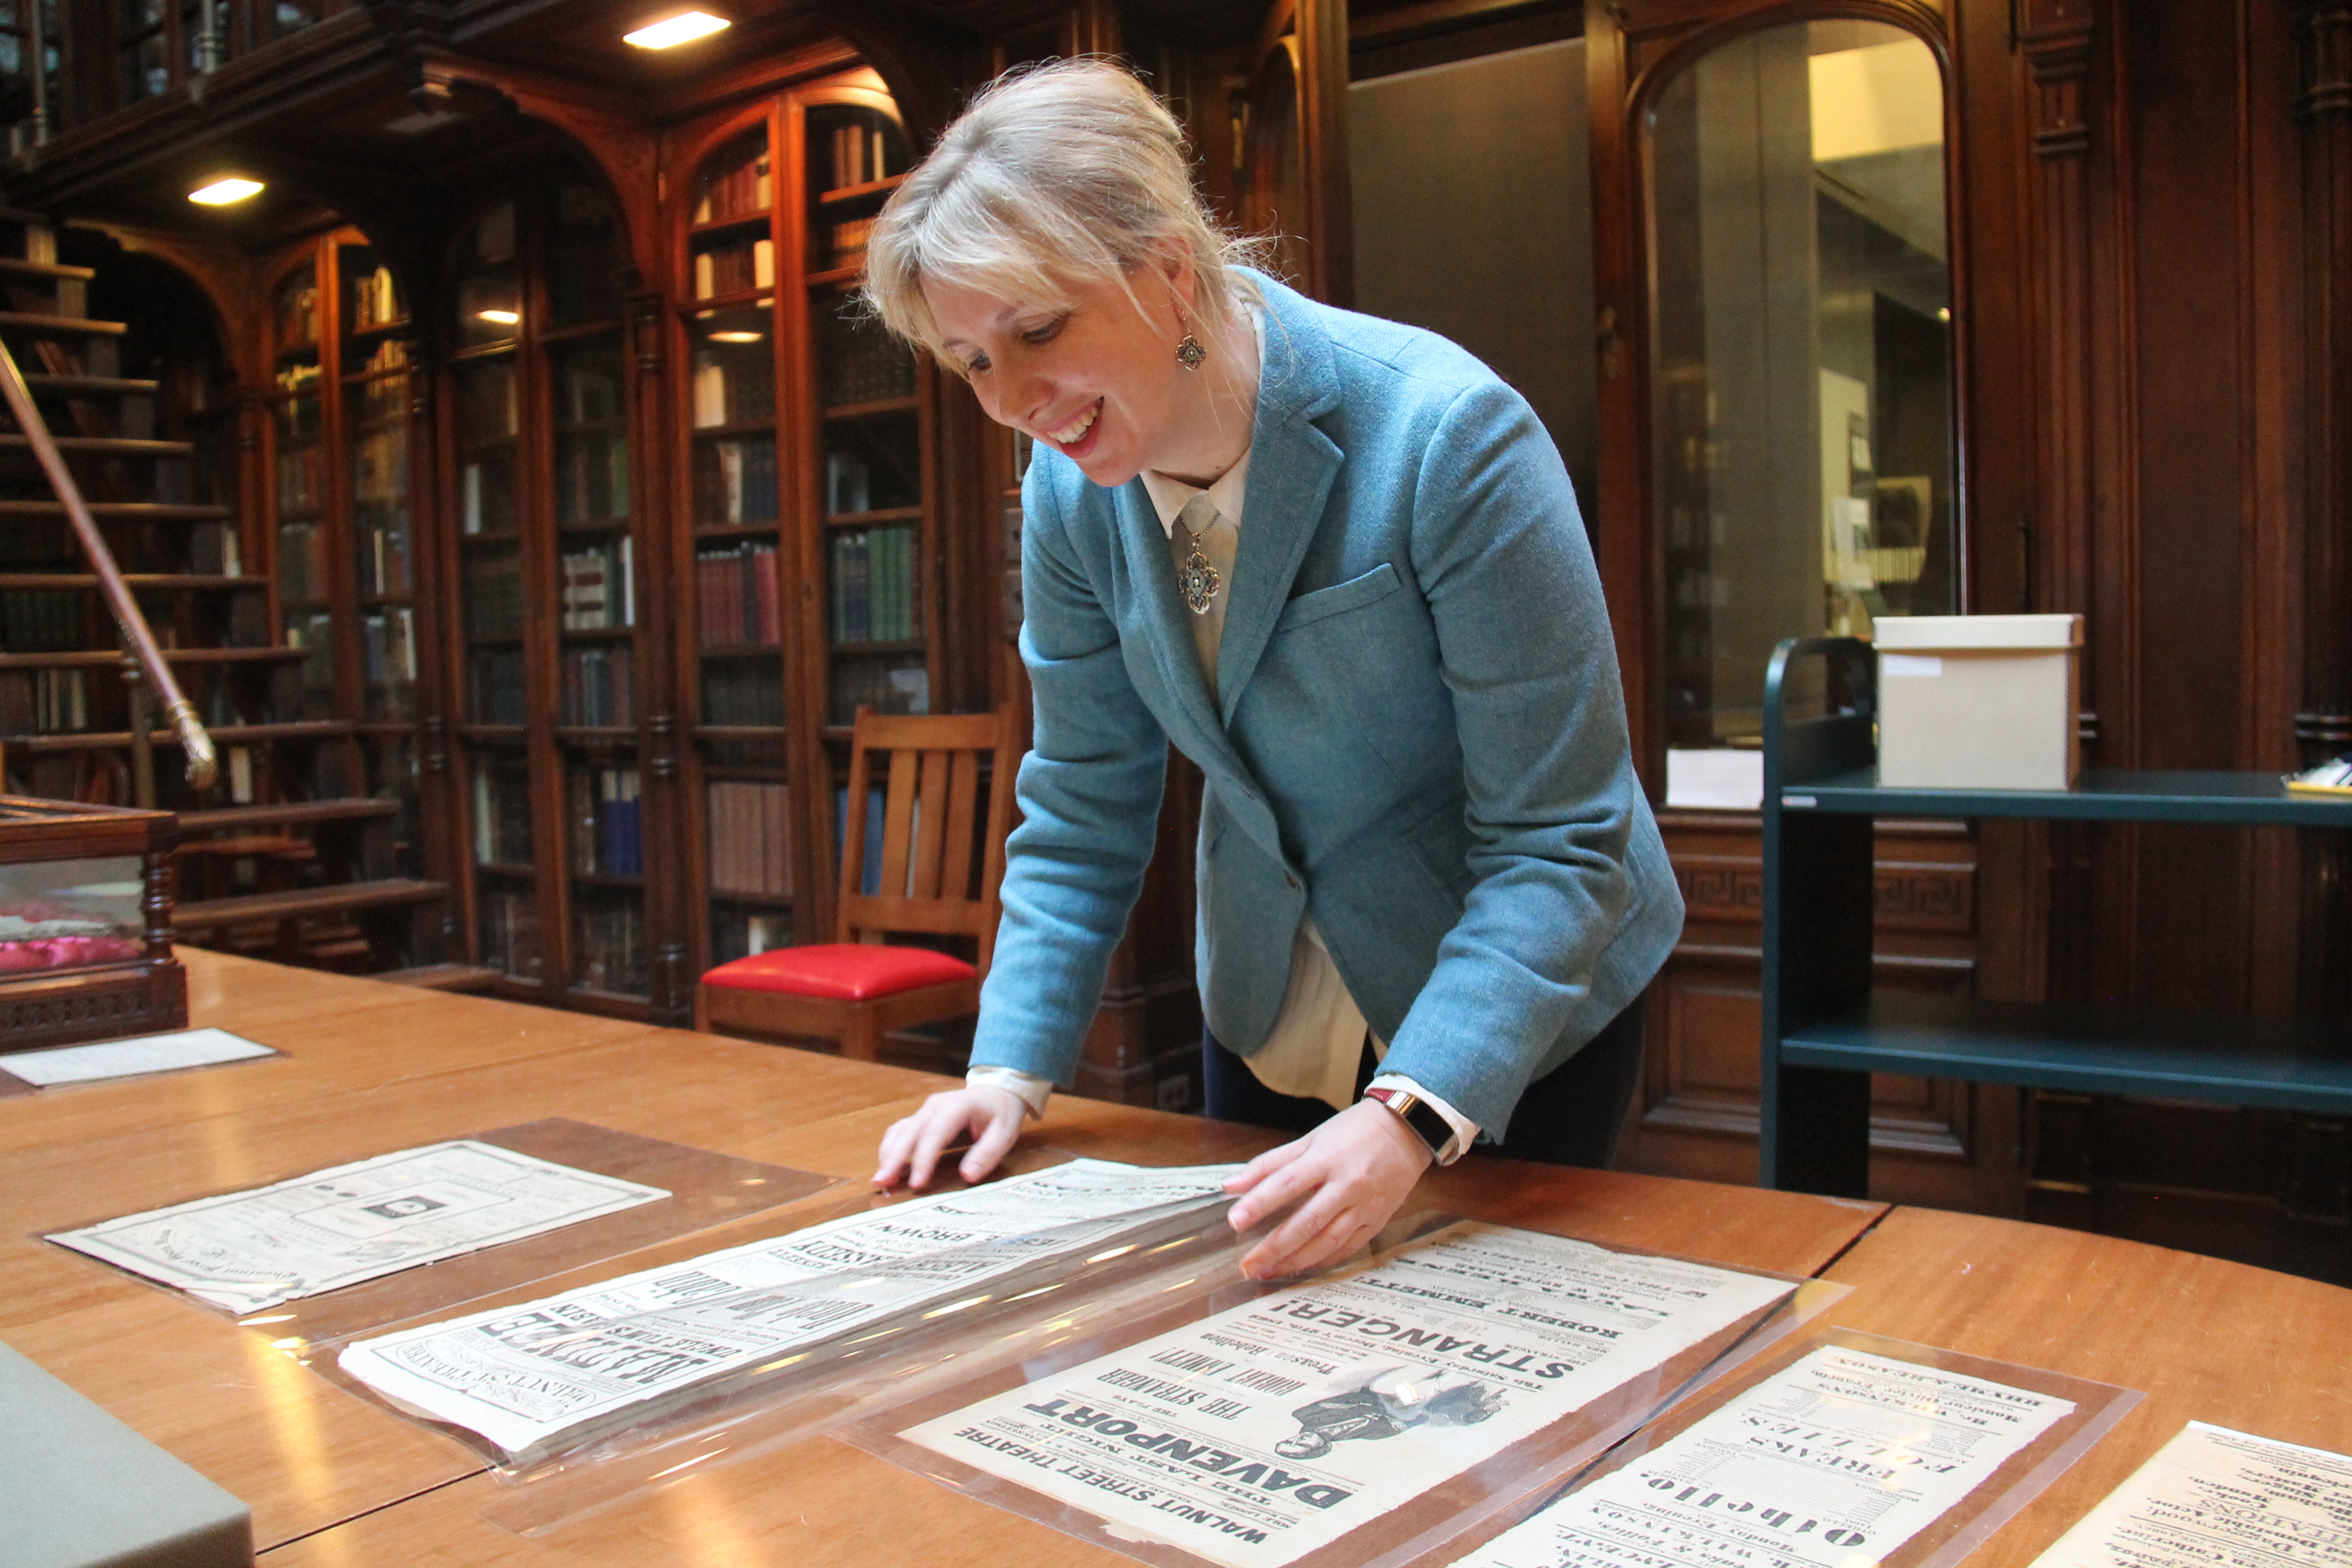 Librarian examines several playbills spread out on wood conference table in a historic library room lined with bookshelves filled with books.